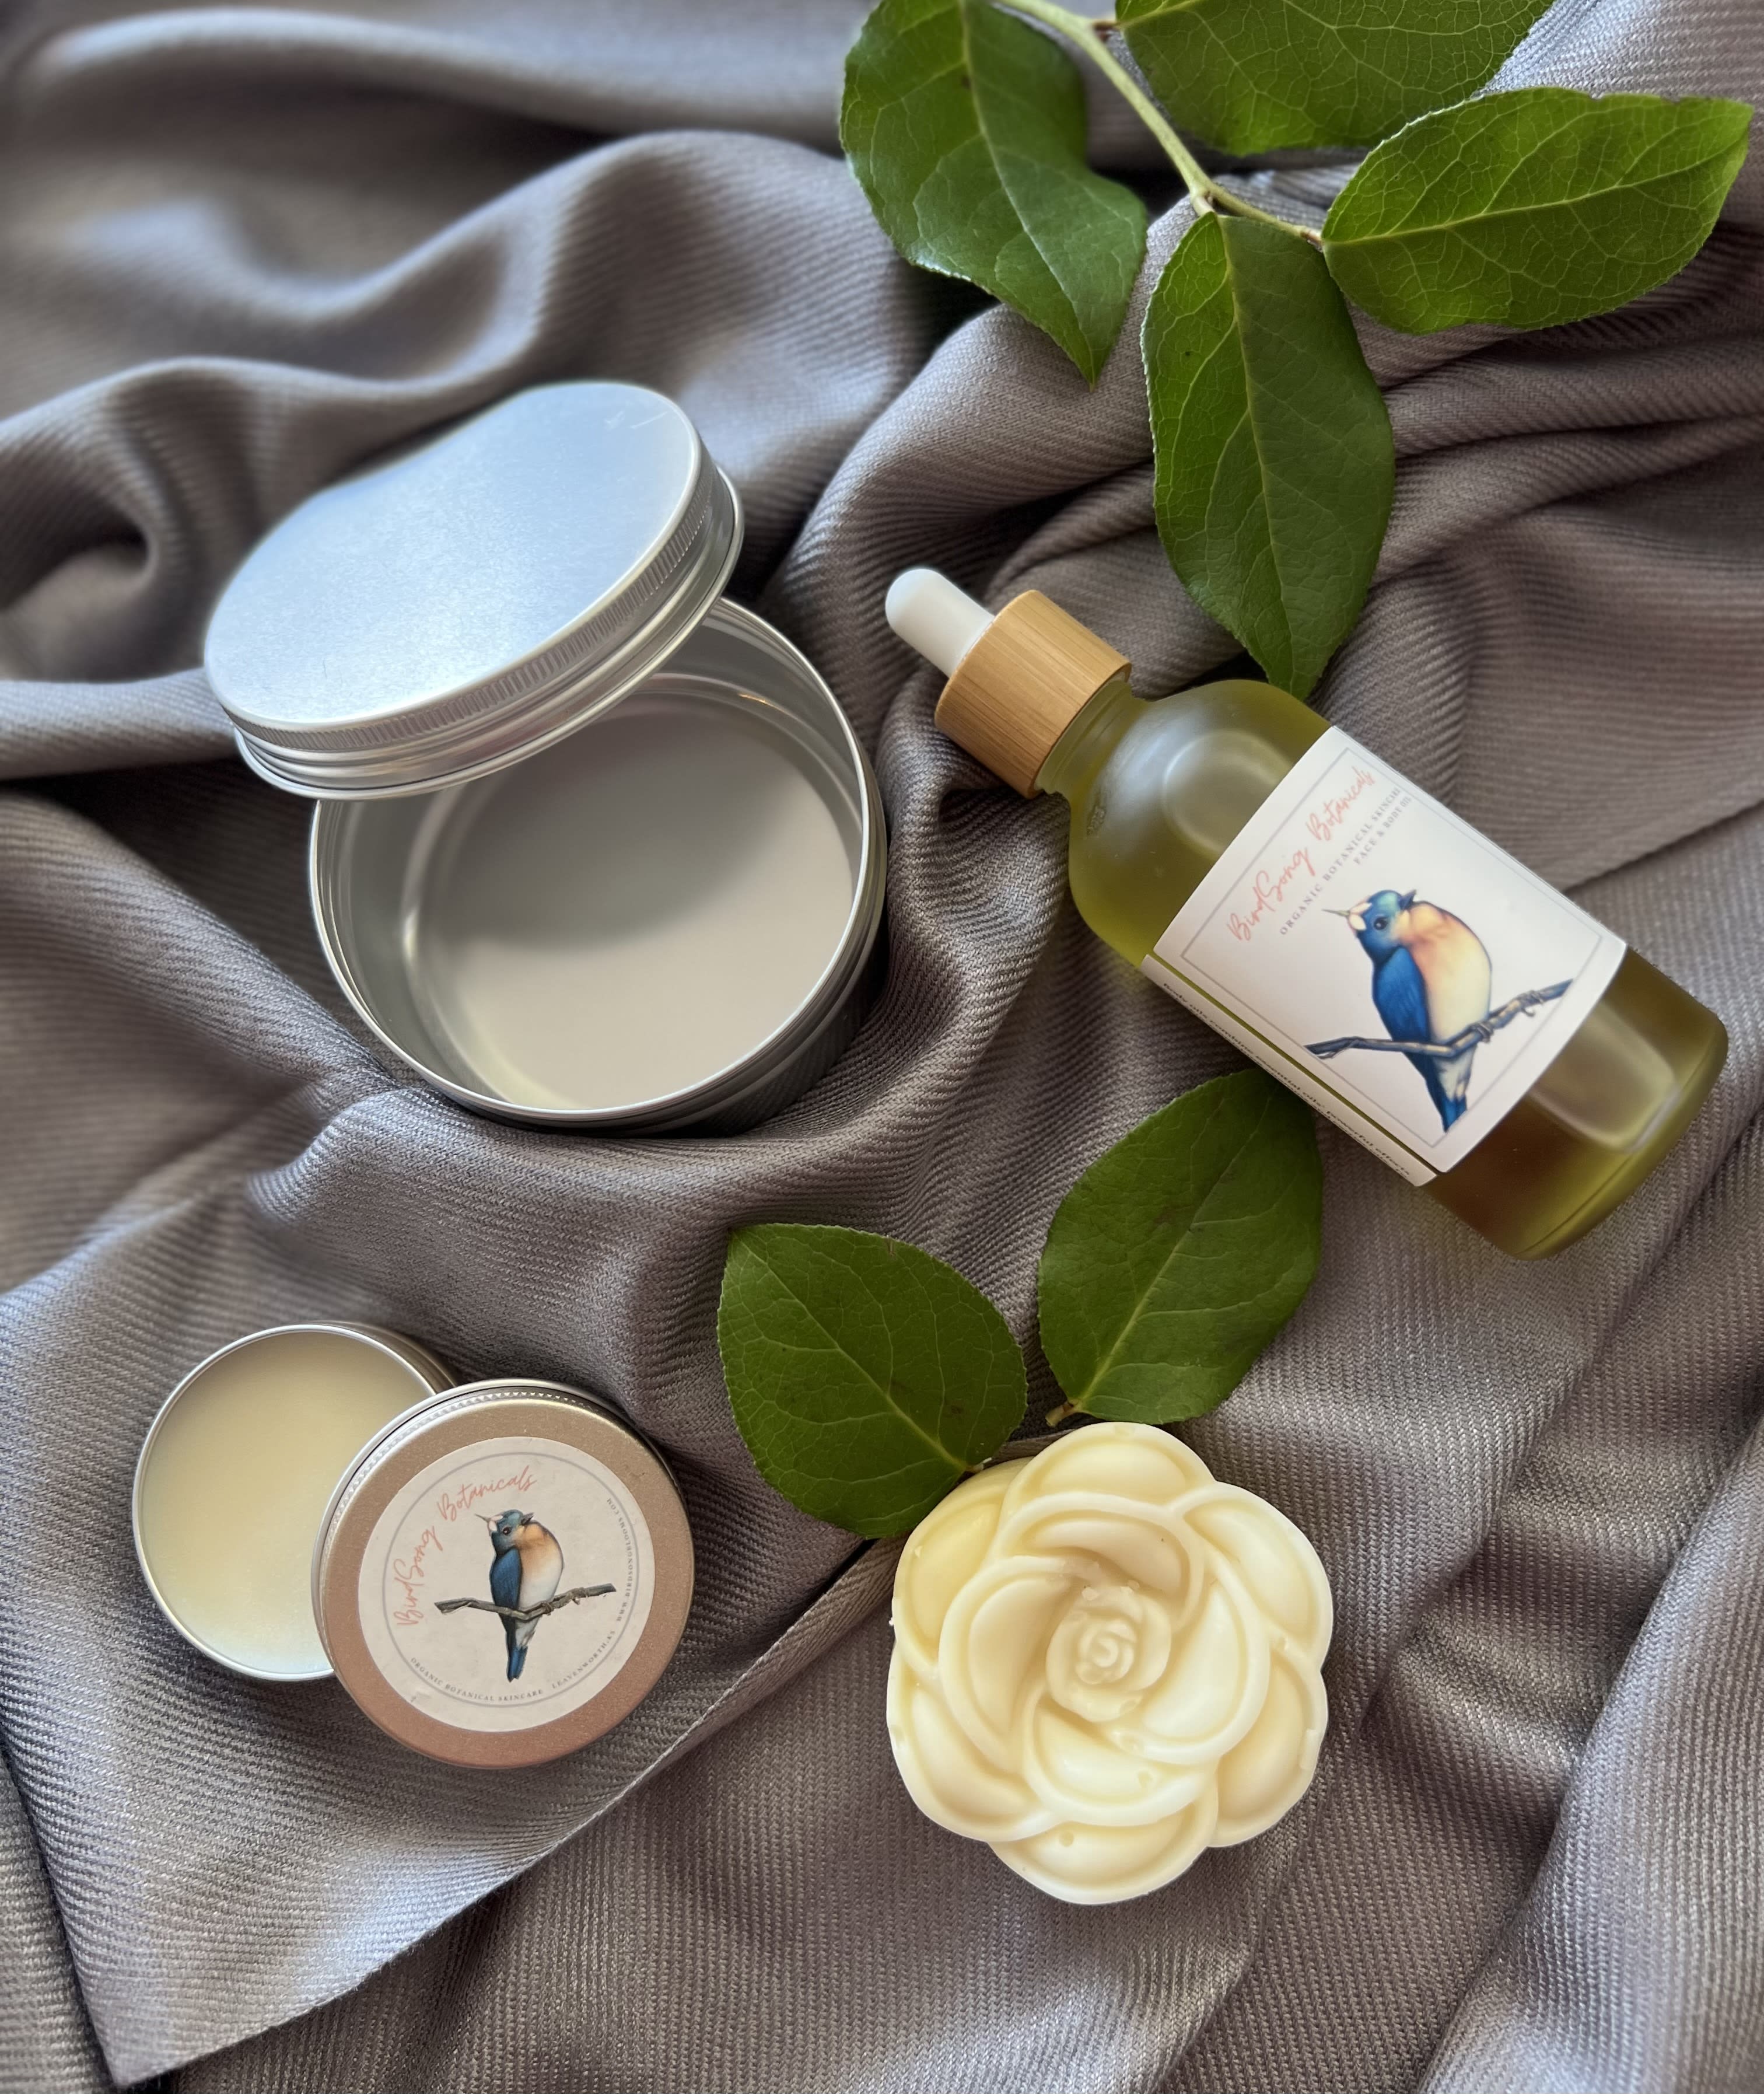 Birdsong Blooms Gift Set - Wild Orchid and White Tea Cuticle and Nail Cream, Floral Infused Face and Body Oil, Heirloom Rose Petal Infused Solid Lotion Body Bar, and Travel Tin expertly gift wrapped for delivery. Made locally in Leavenworth using natural and organic ingredients by BirdSong Blooms.